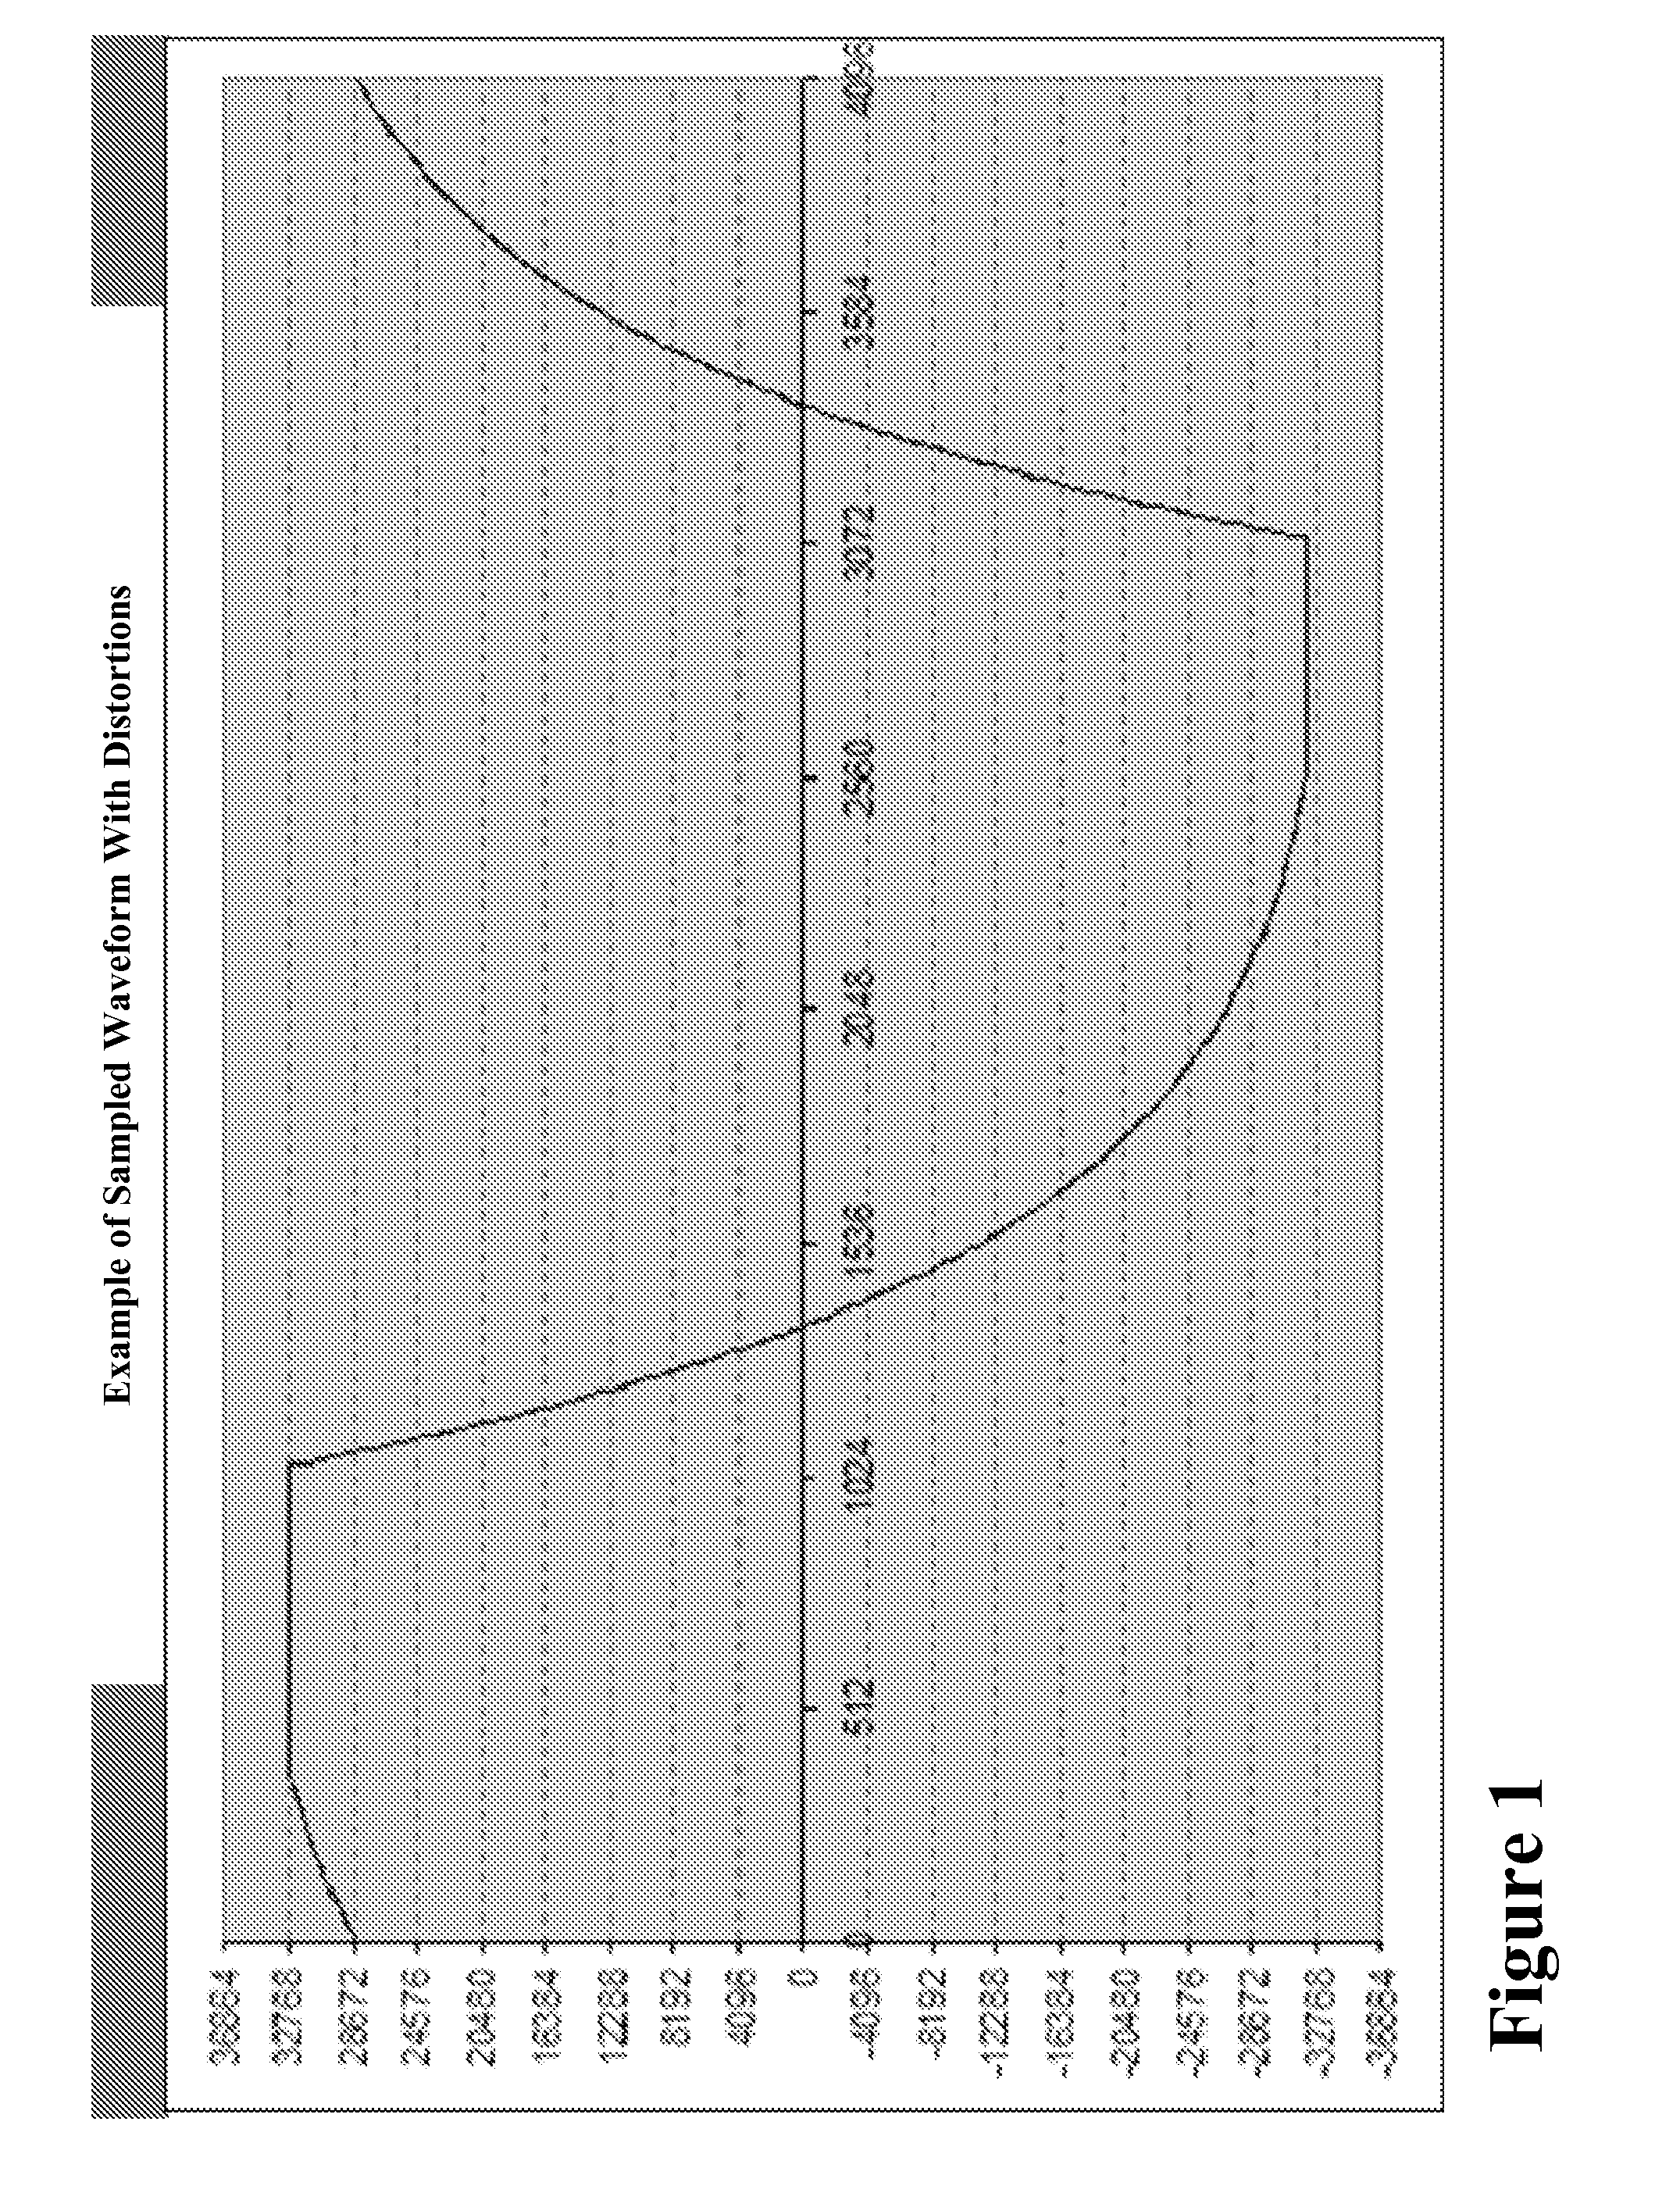 Non-linearity calibration using an internal source in an intelligent electronic device